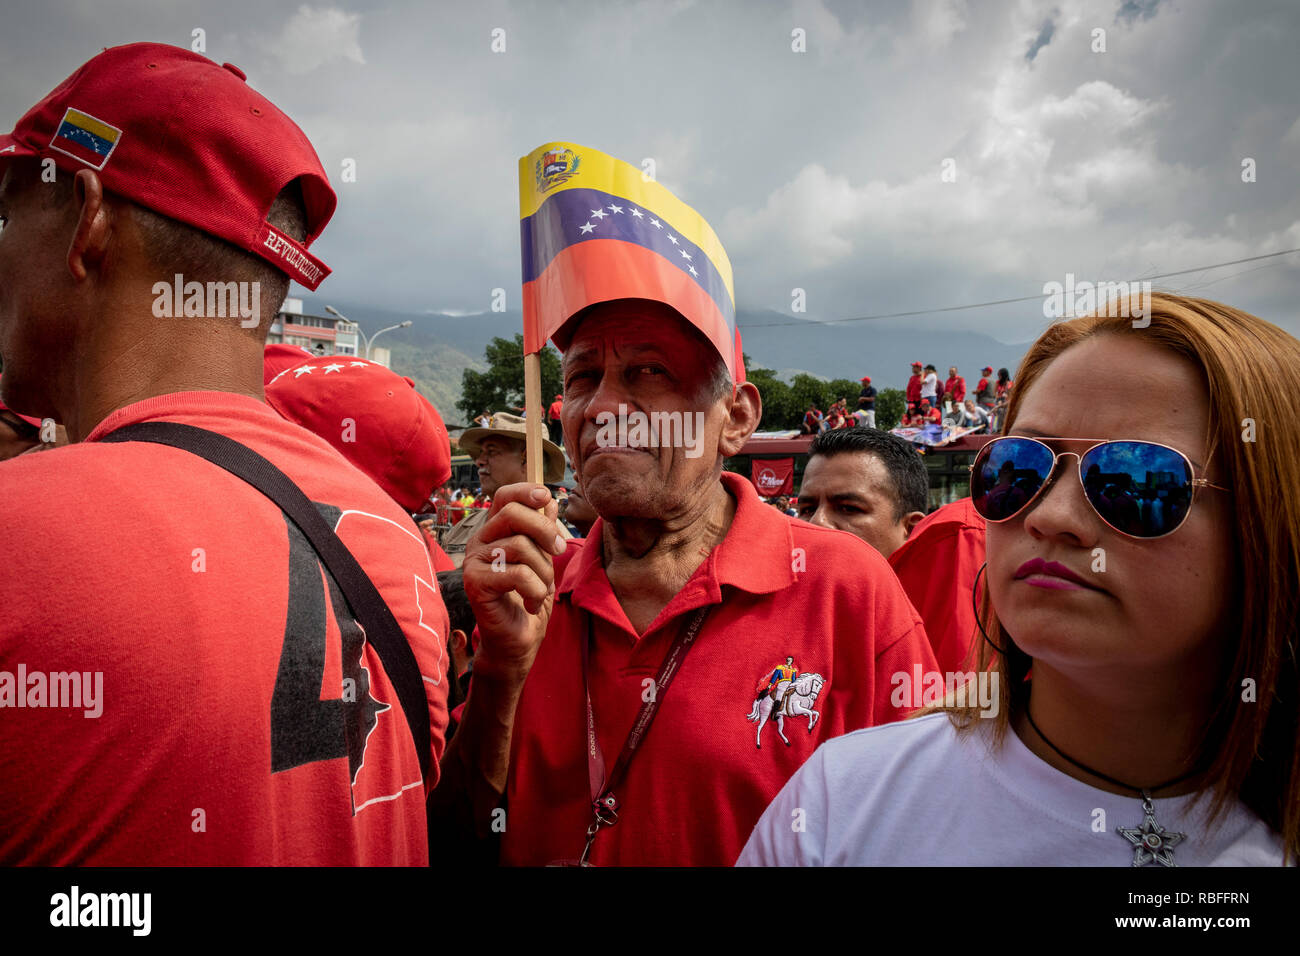 Caracas, Venezuela. 10th Jan, 2019. Supporters of the Venezuelan government take part in a rally in red in support of President Maduro. Maduro was sworn in for his second term. Numerous states, international organizations and the Venezuelan opposition spoke of an undemocratic electoral process and did not recognize the result of the last election. Credit: Rayner Pena/dpa/Alamy Live News Stock Photo